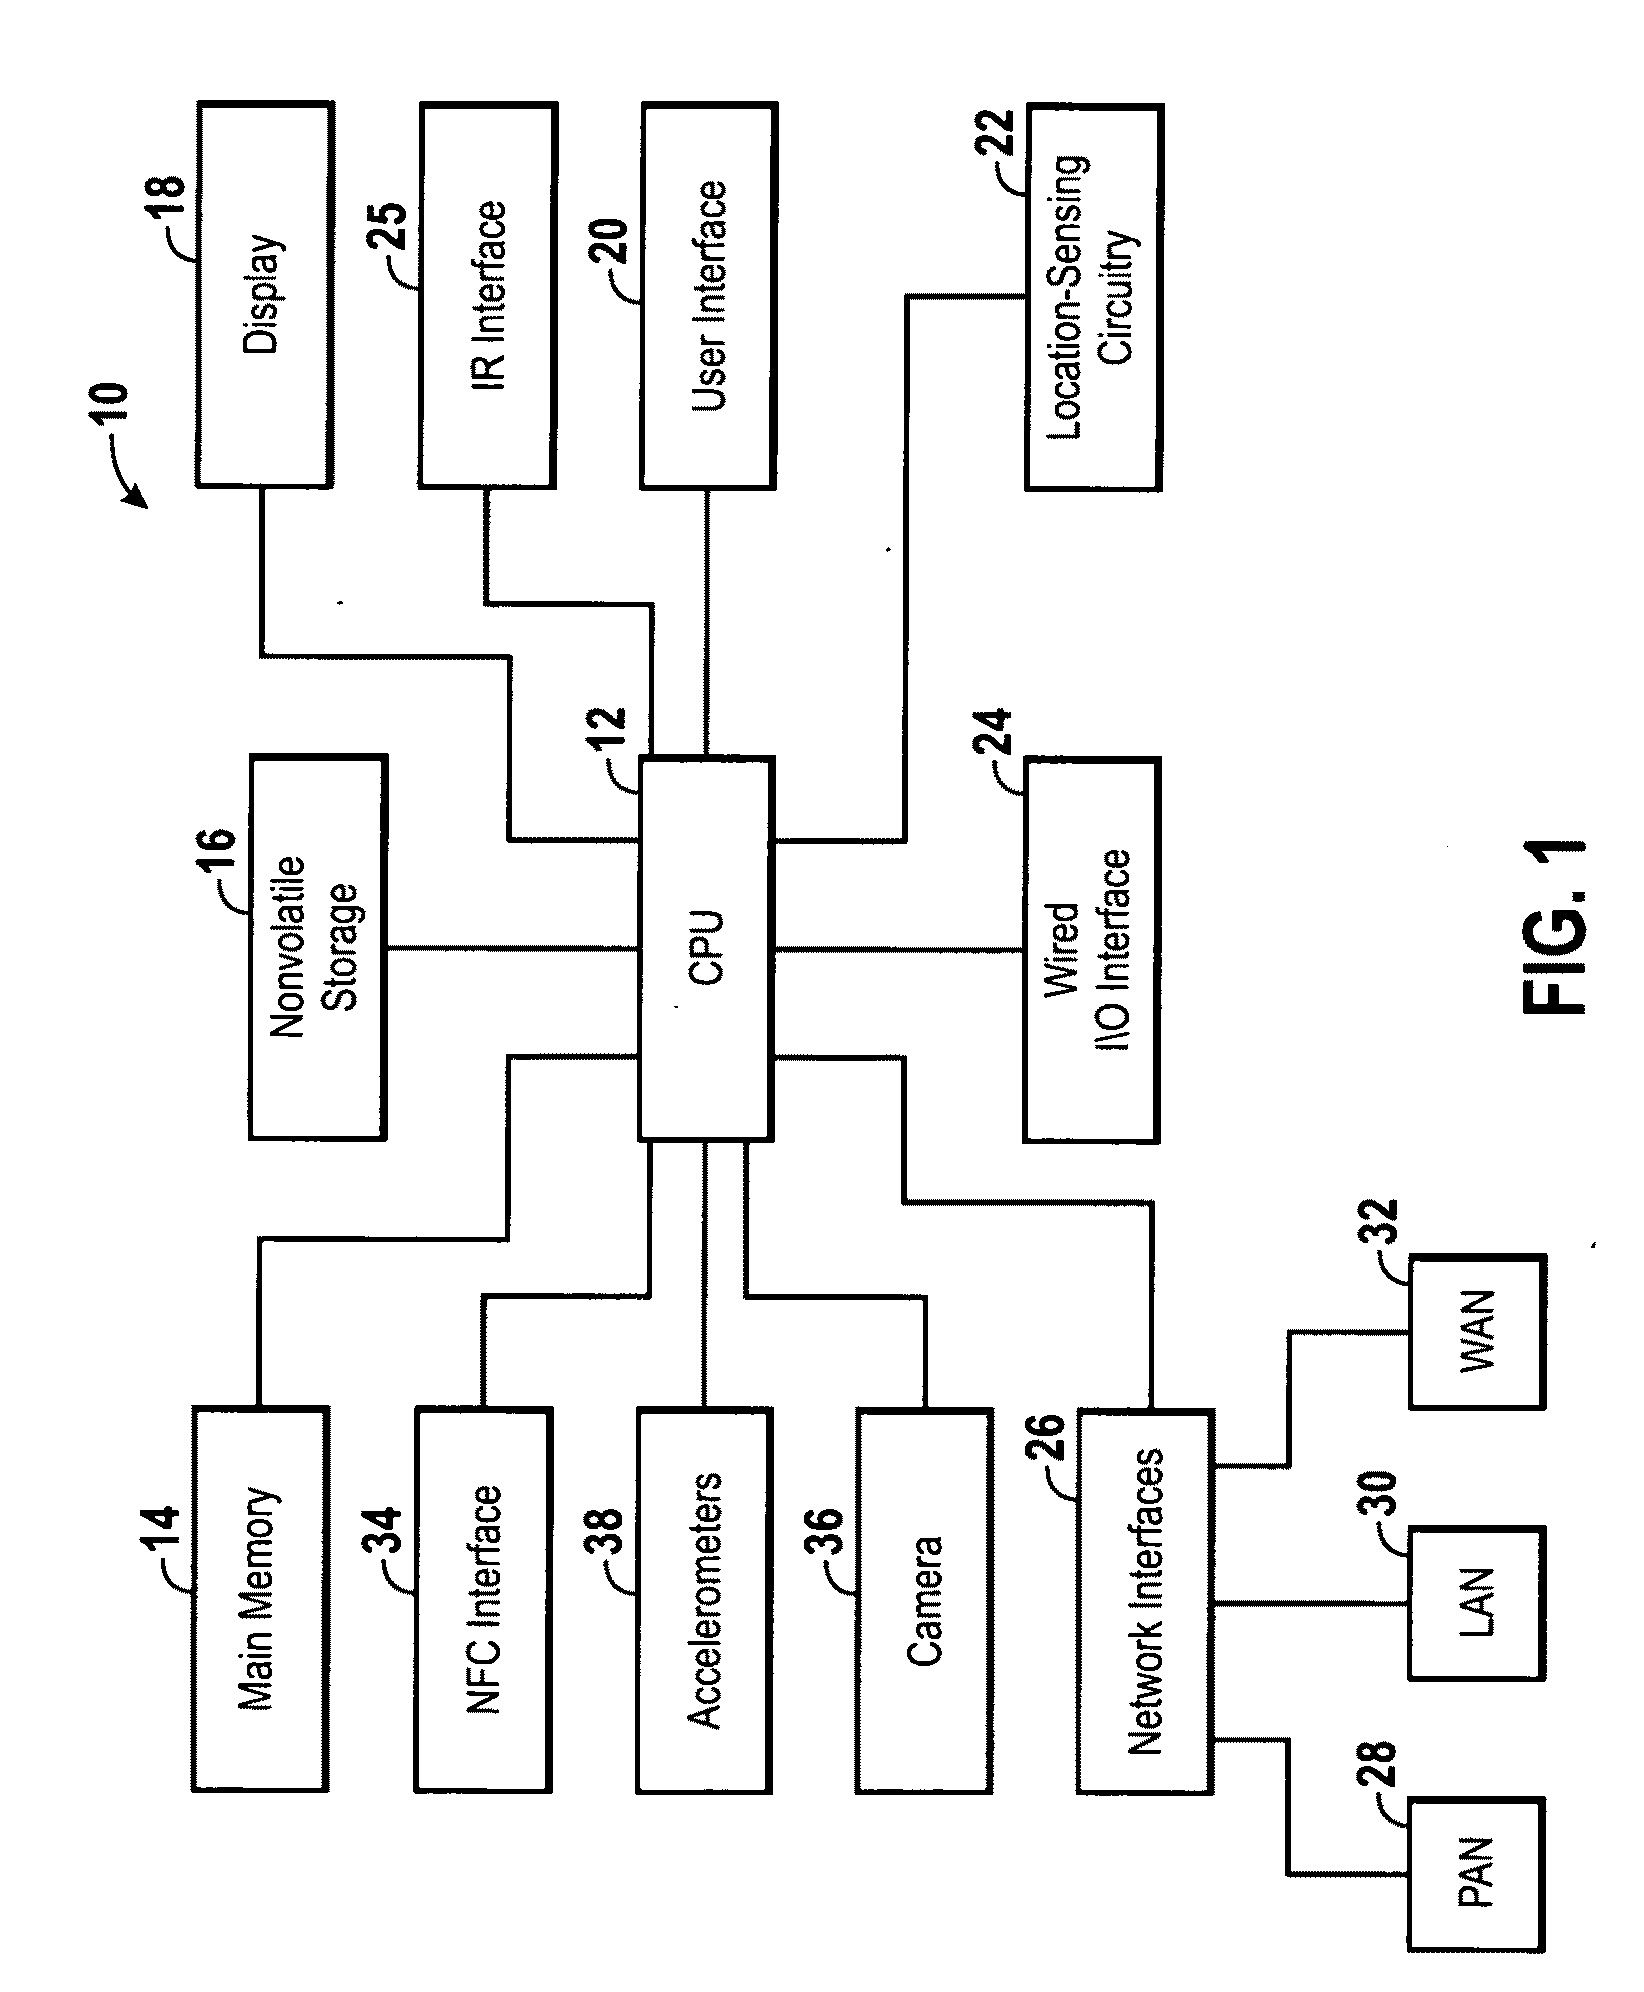 System and method for simplified resource sharing